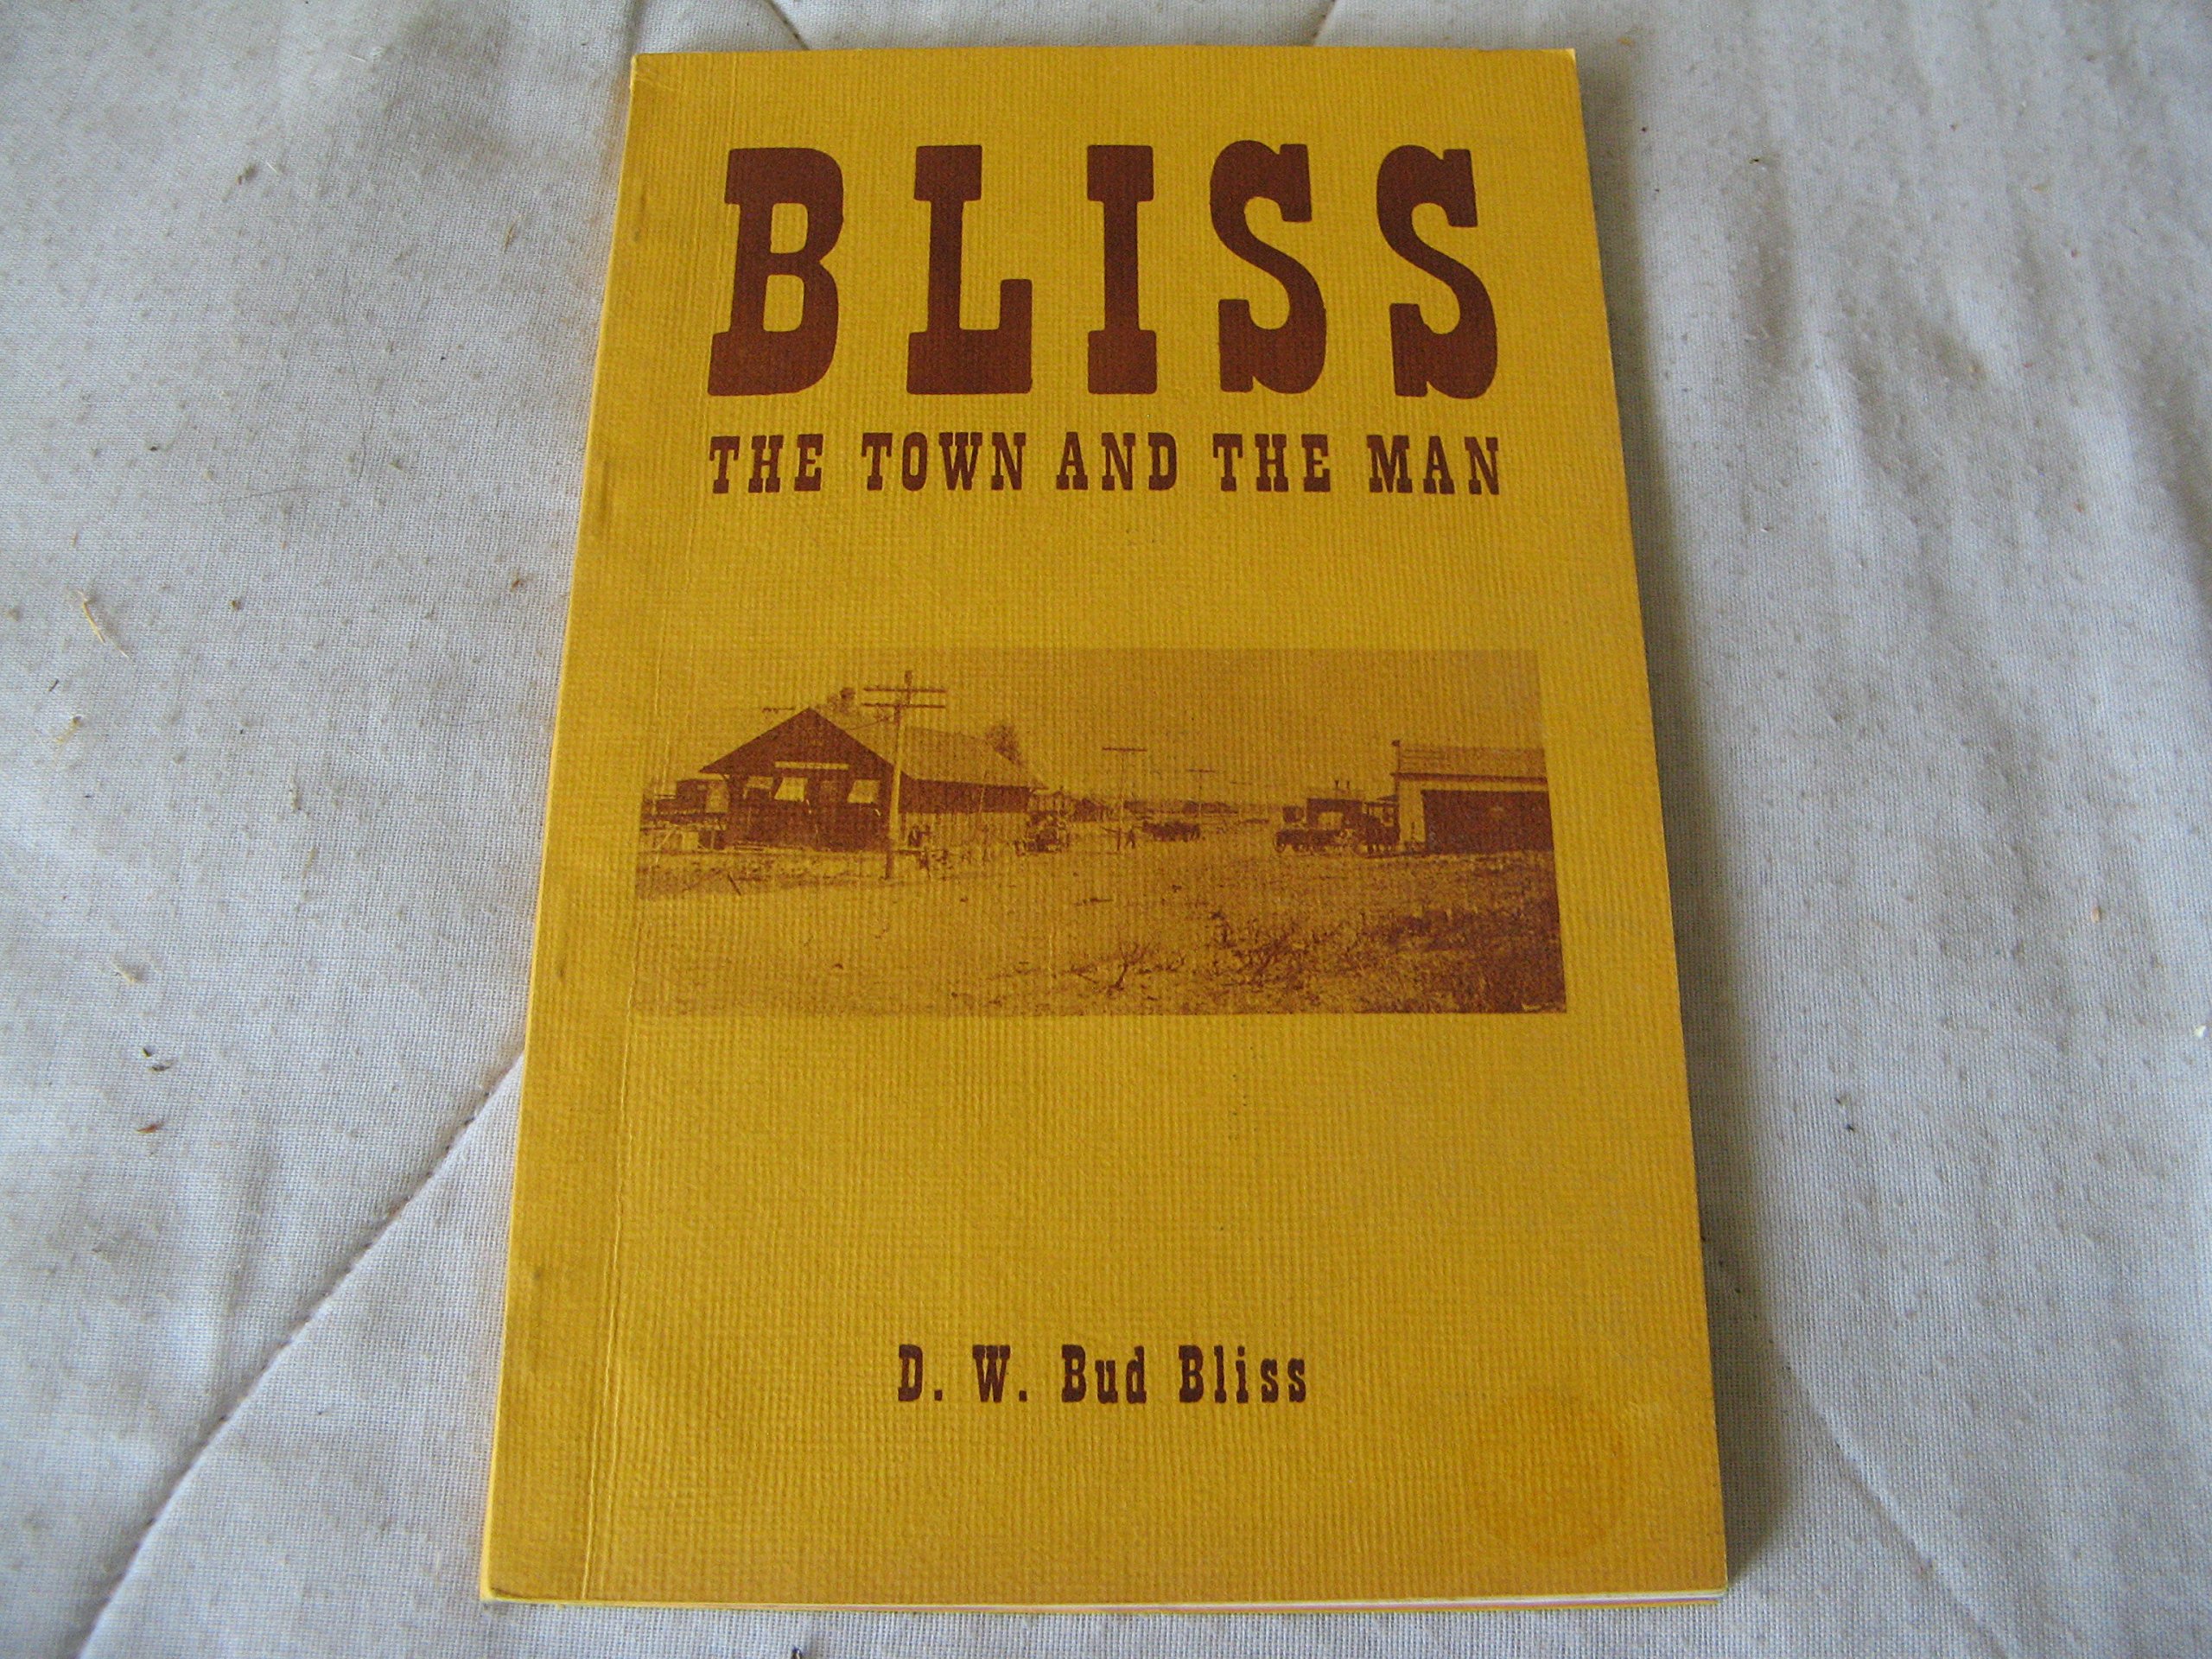 Bliss, the town and the man (book cover)